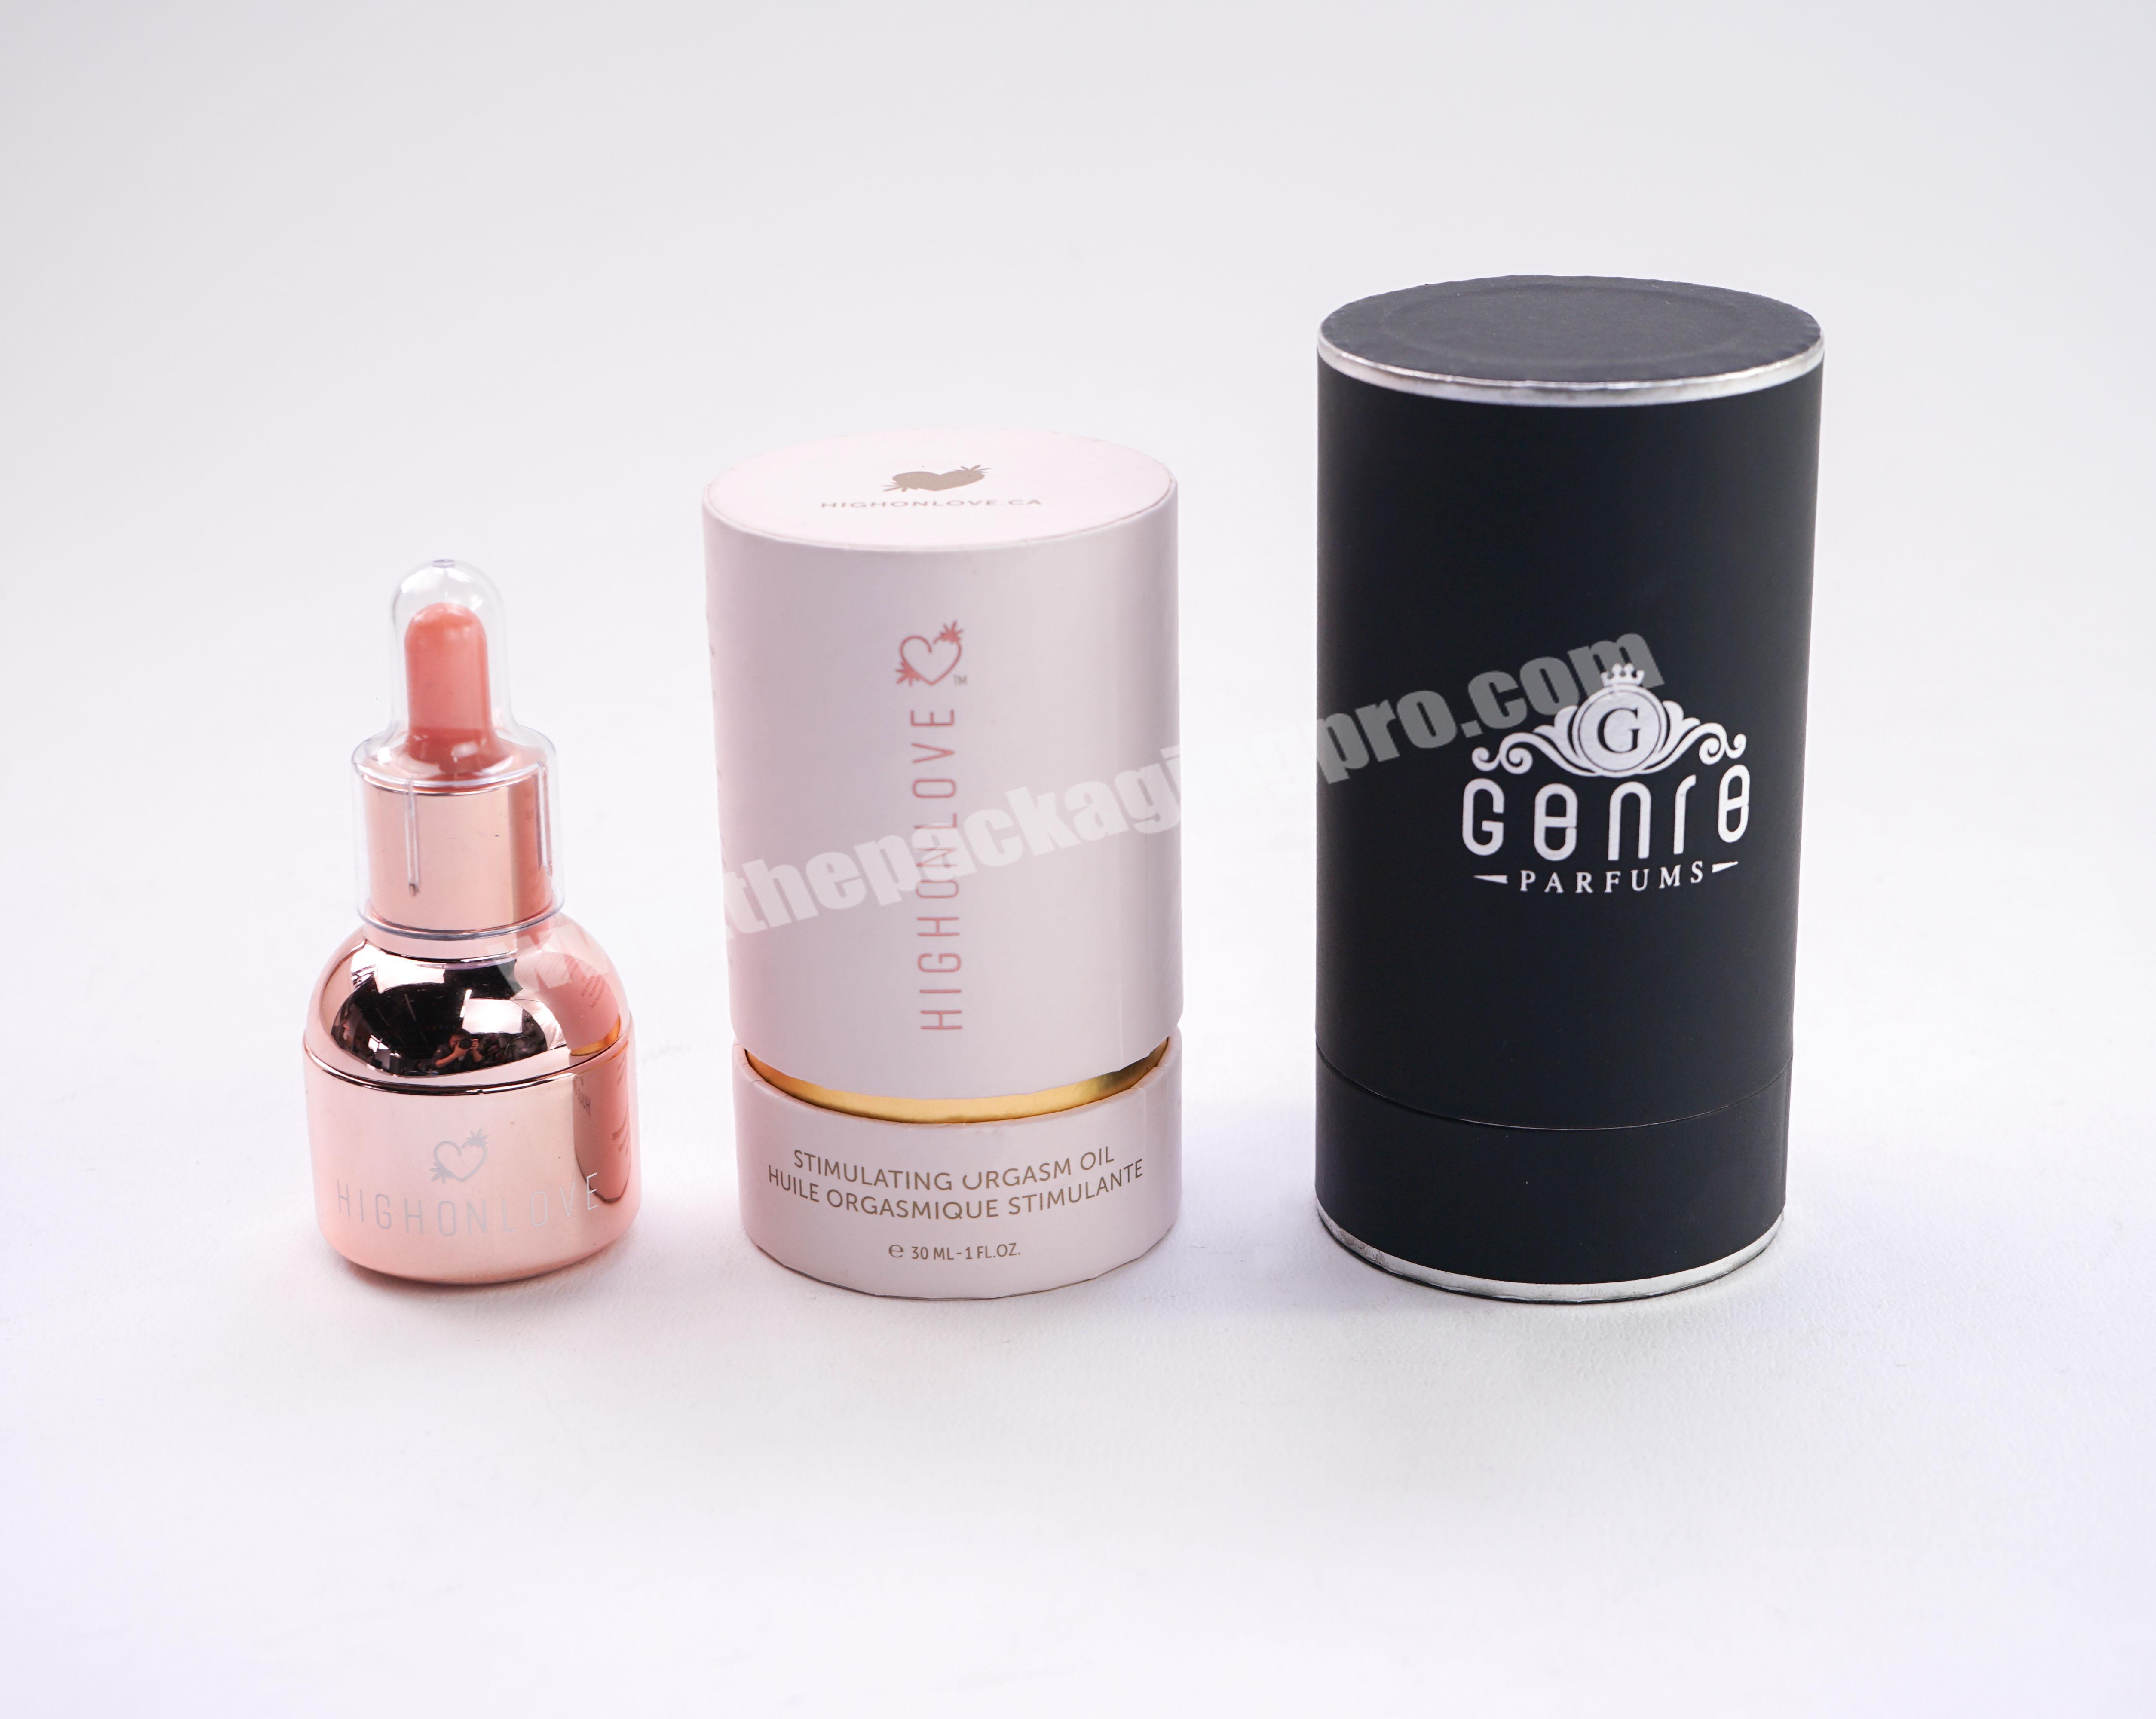 Bespoke Brand Printed Elegant Beauty Products Bath Bombs Paper Cans Packaging Supplier